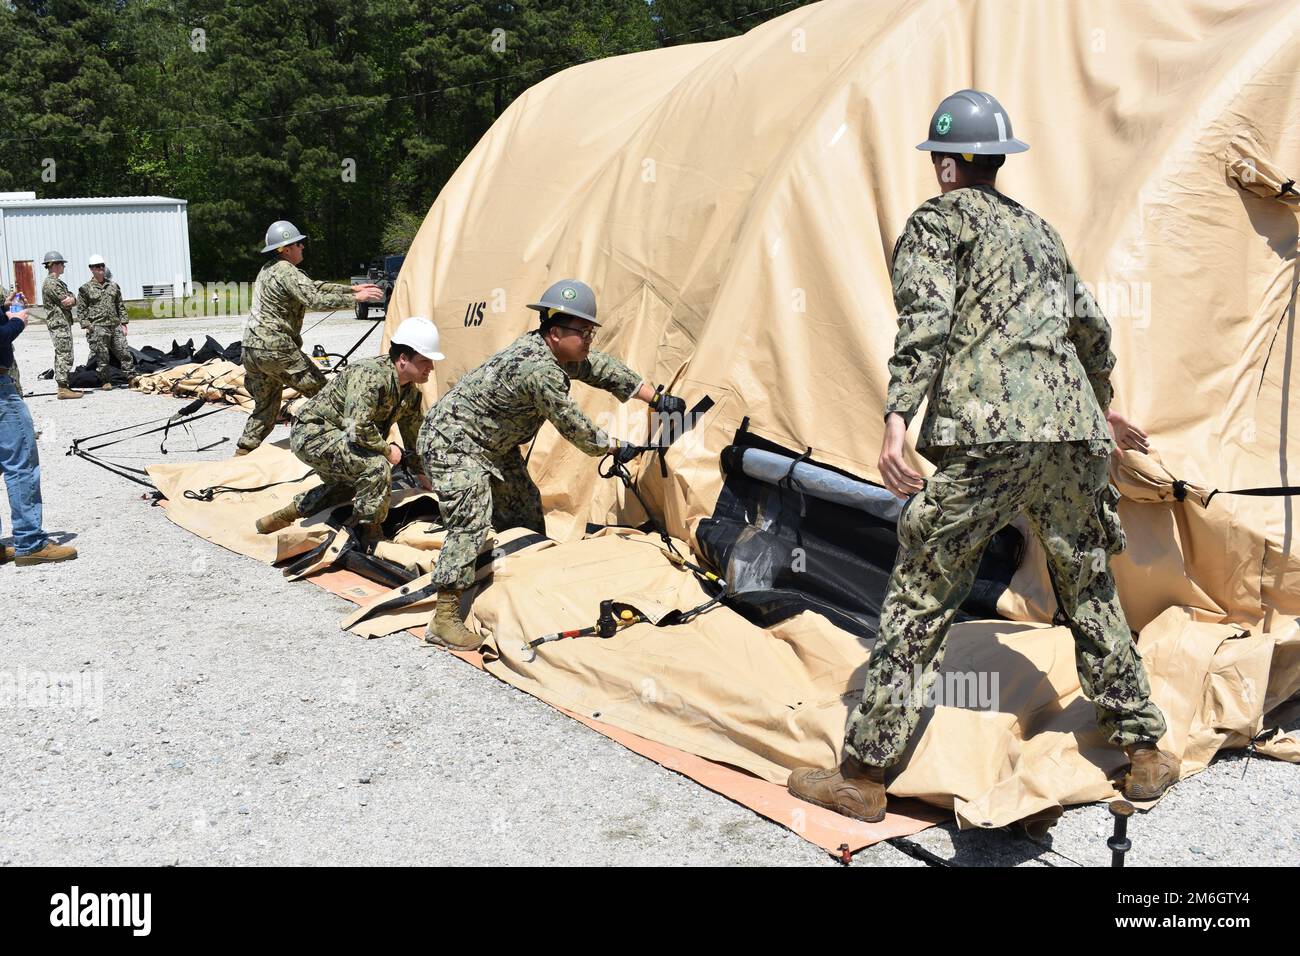 NMRLC Design Team Lt.j.g. Ryan Siwy leads a team as air beam tents are deflated to properly control how they are deflated for faster storage. NMRLC supports readiness by providing deployable medical systems, high-quality eyewear and ophthalmic devices, and fleet logistics solutions. The command's vision is to be Navy Medicine's premiere integrated medical logistics support activity. Stock Photo